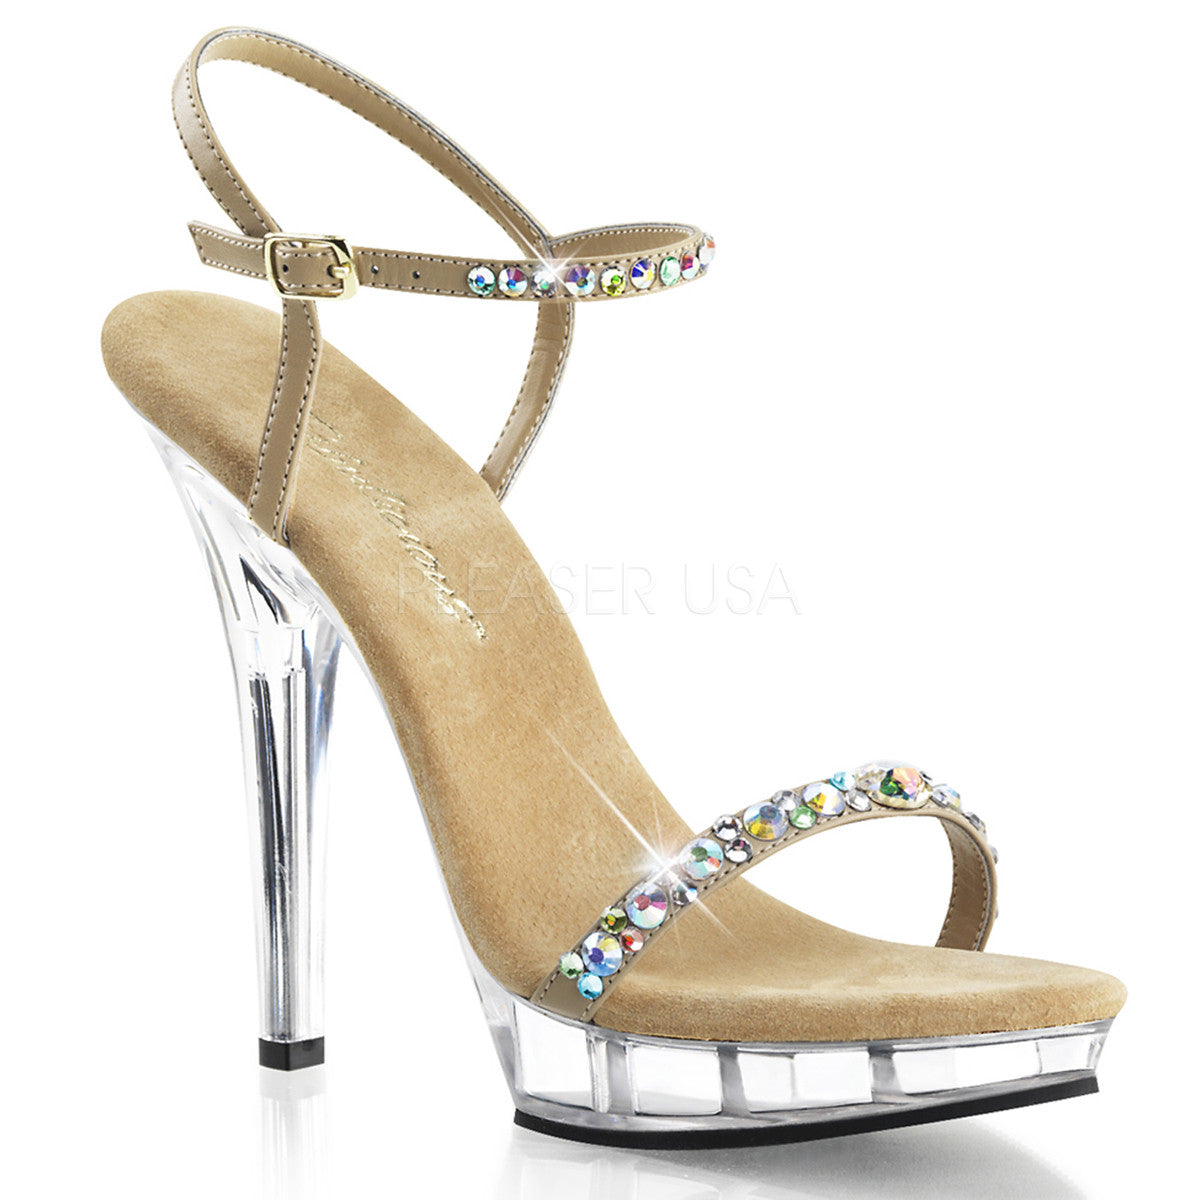 FABULICIOUS LIP-131 Taupe Pu-Clear Ankle Strap Sandals - Shoecup.com